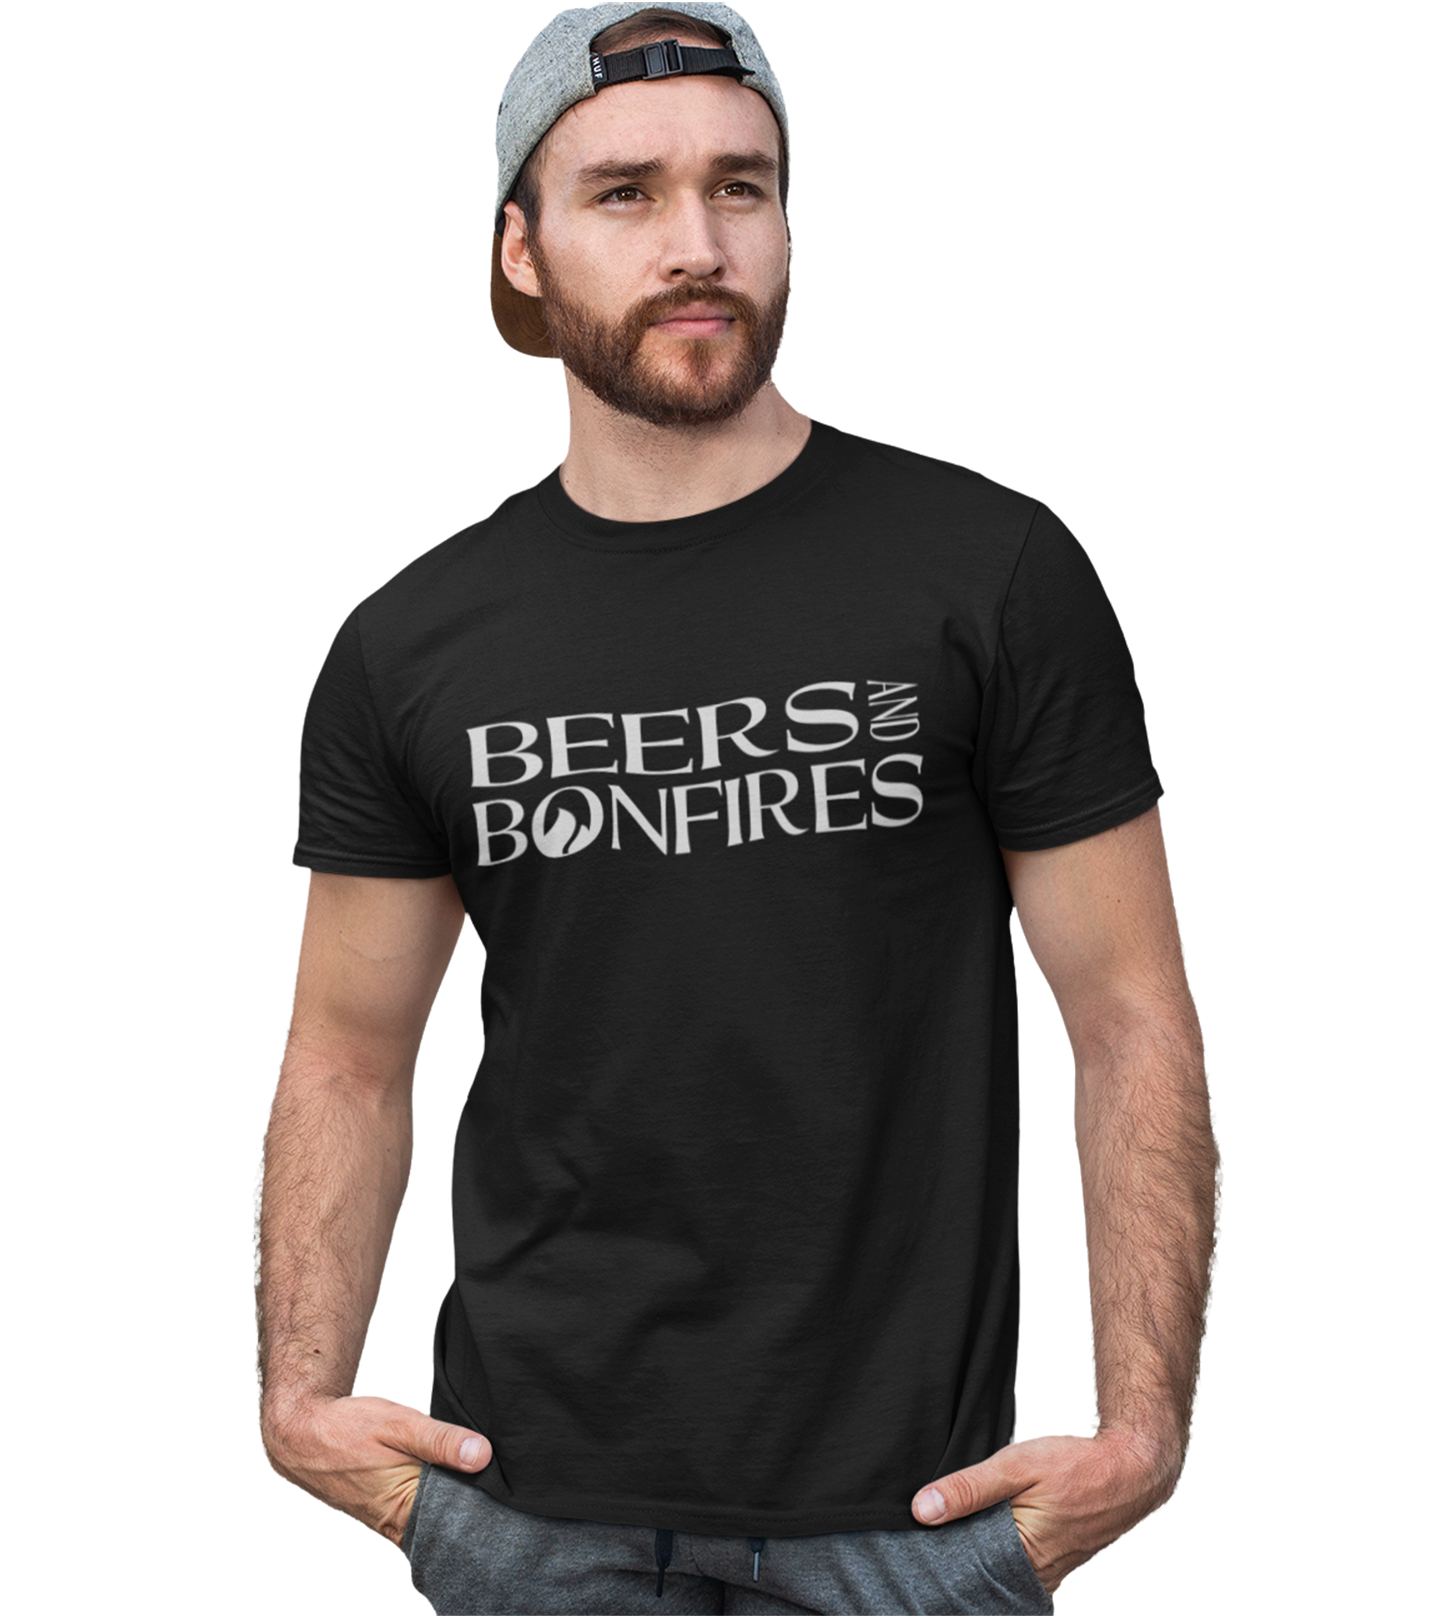 Beers and Bonfires "Text Style" Tees